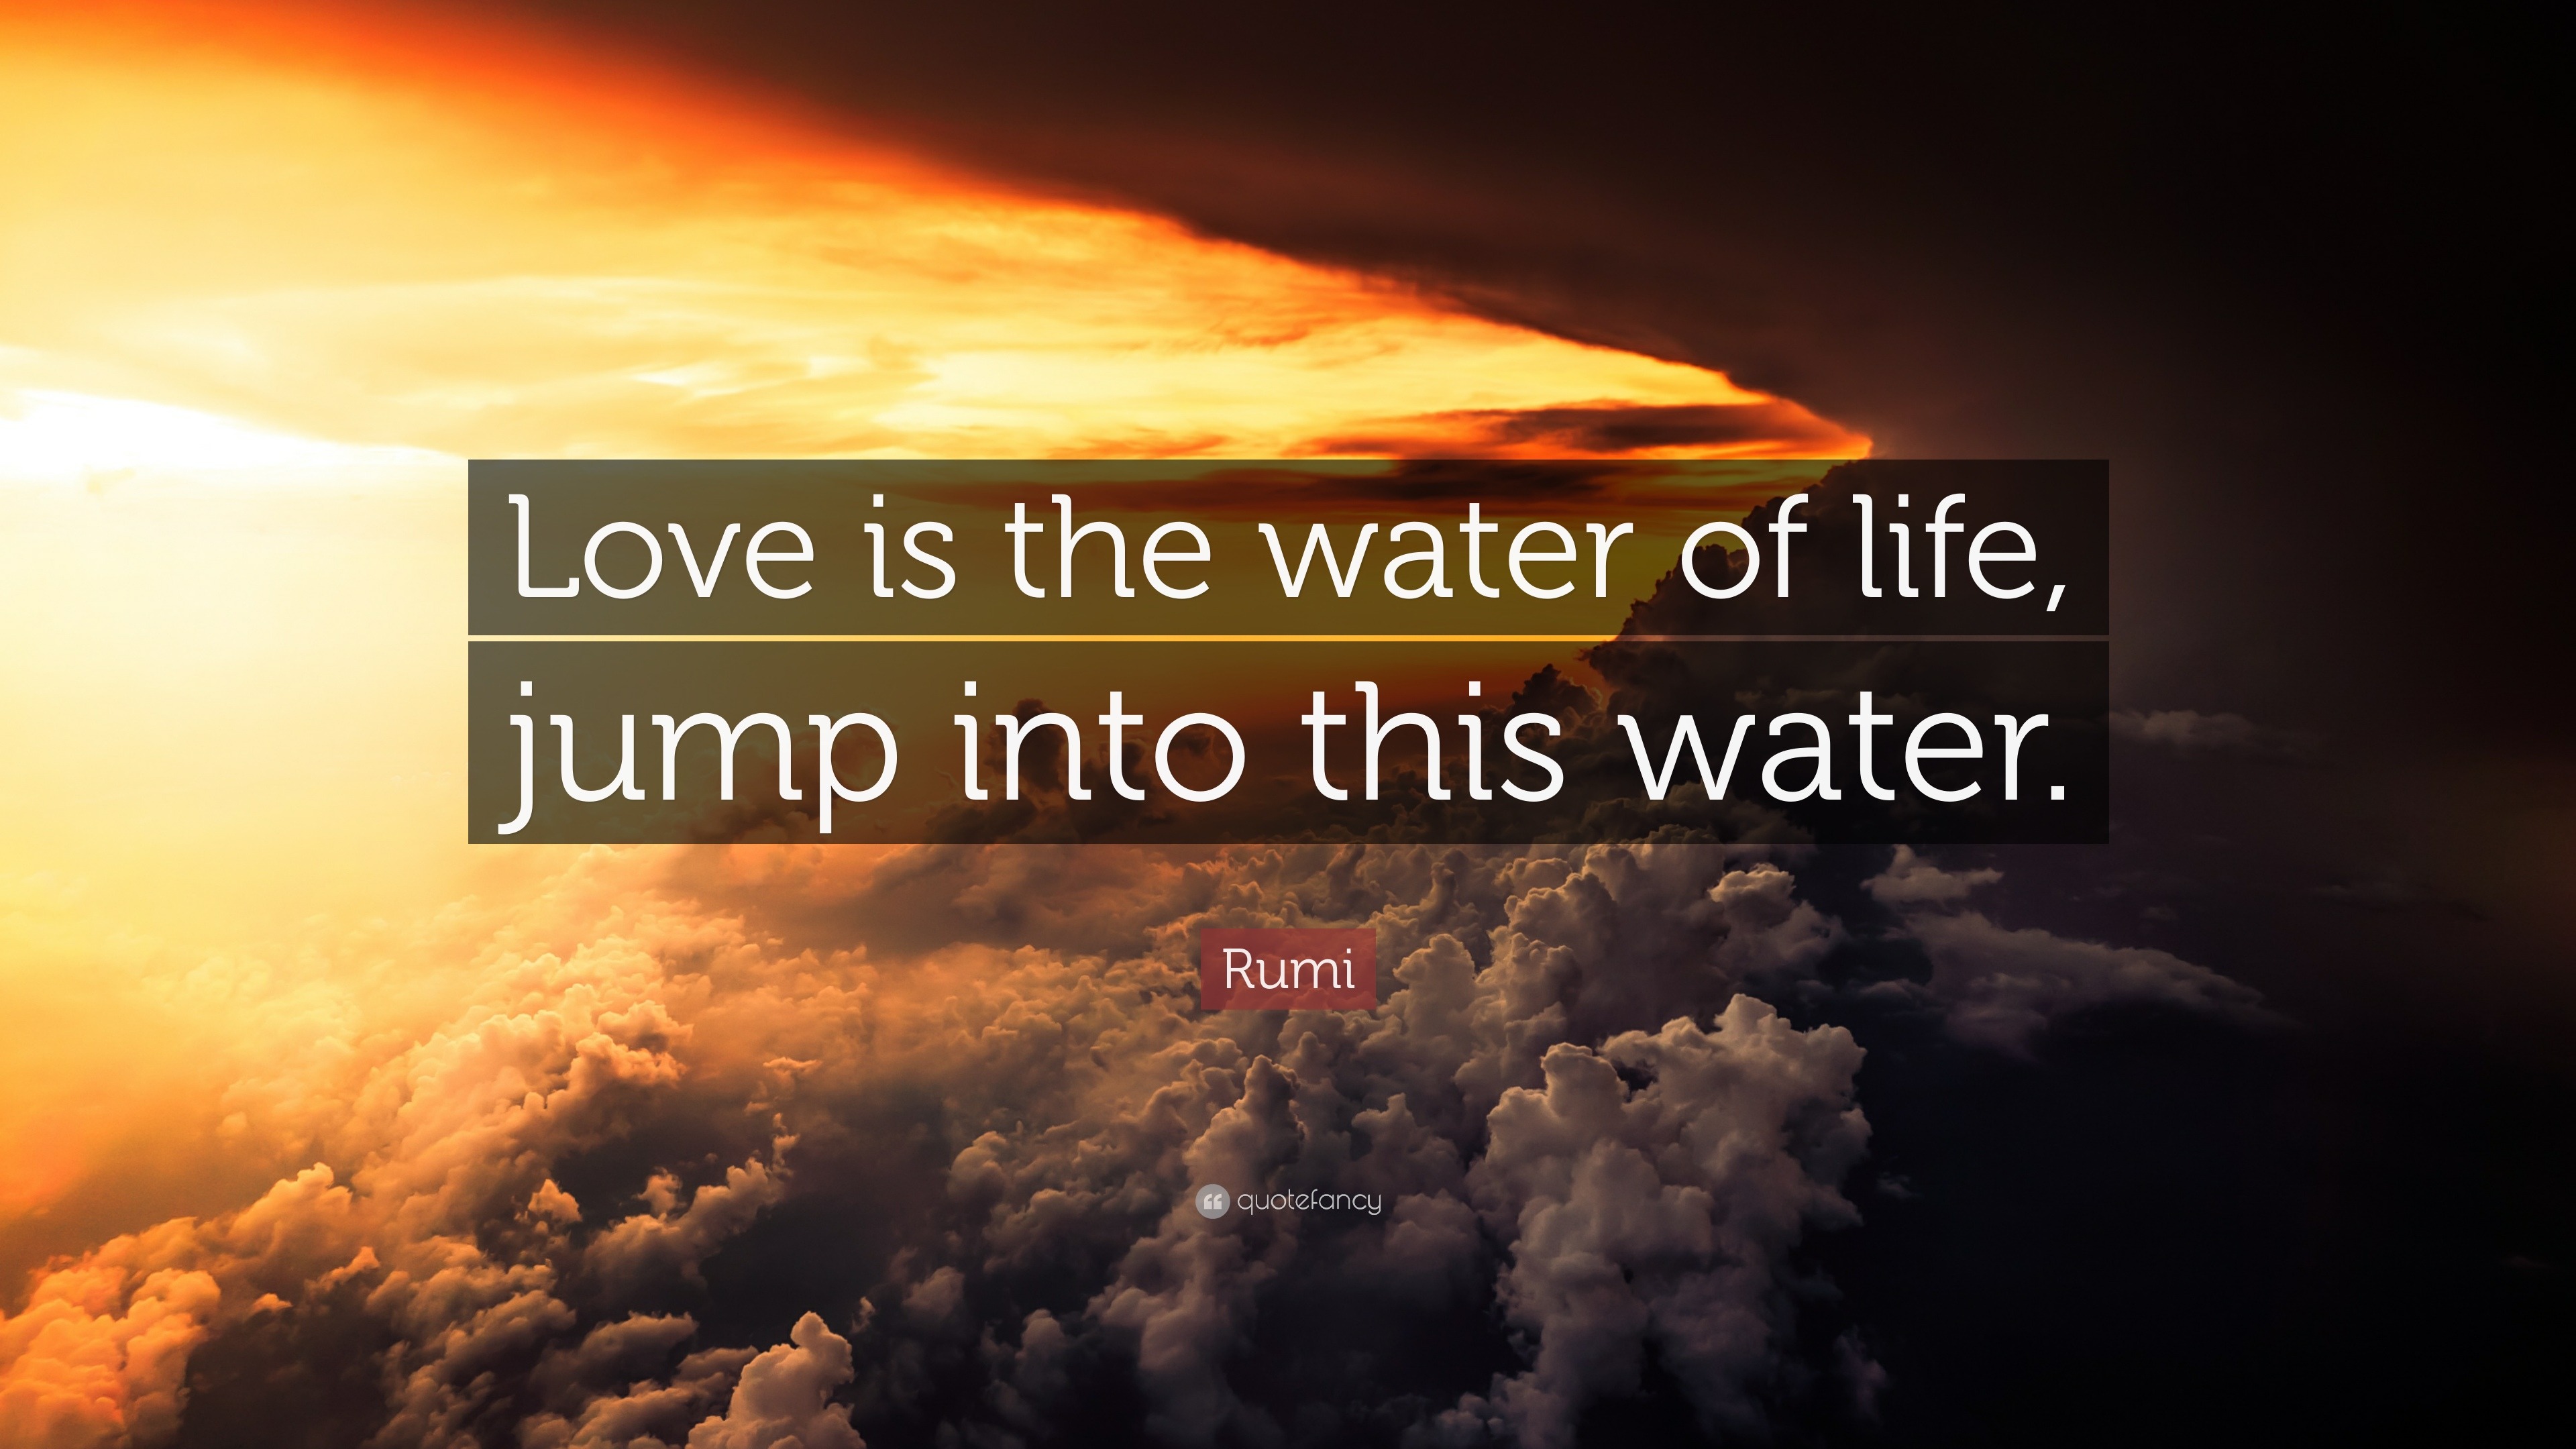 Rumi Quote “Love is the water of life jump into this water